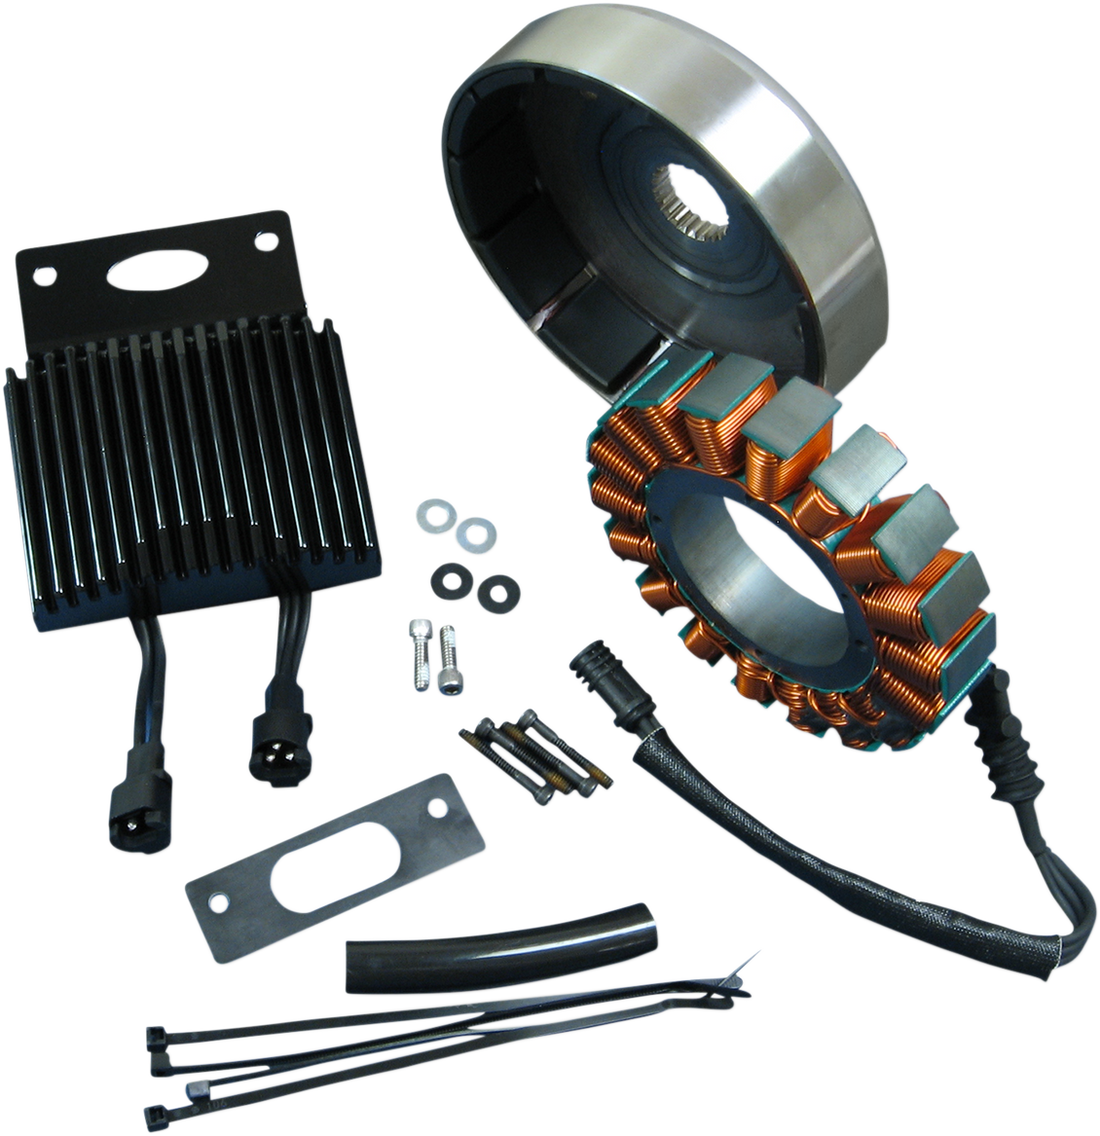 2112-1324 - CYCLE ELECTRIC INC 3-Phase 58A Charging Kit - Harley Davidson Air Cooled Models CE-94T-14